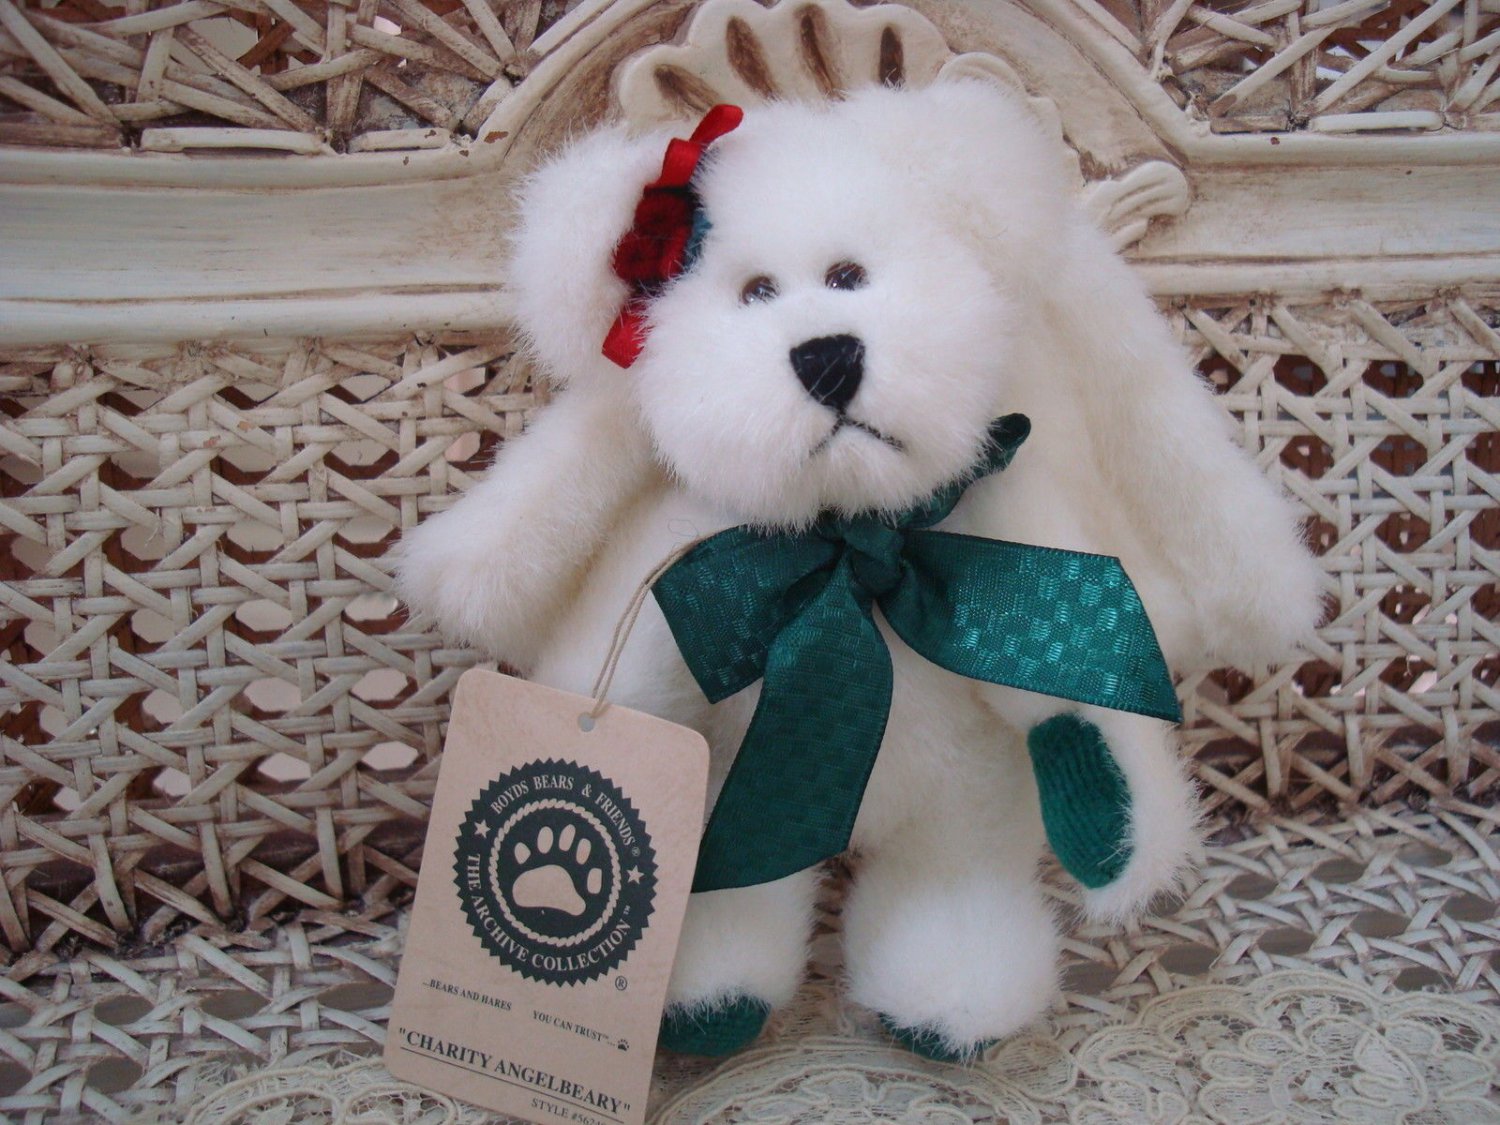 BOYDS CHARITY ANGELBEARY 5 1/2" ANGEL BEAR ORNAMENT *NEW STORE STOCK*